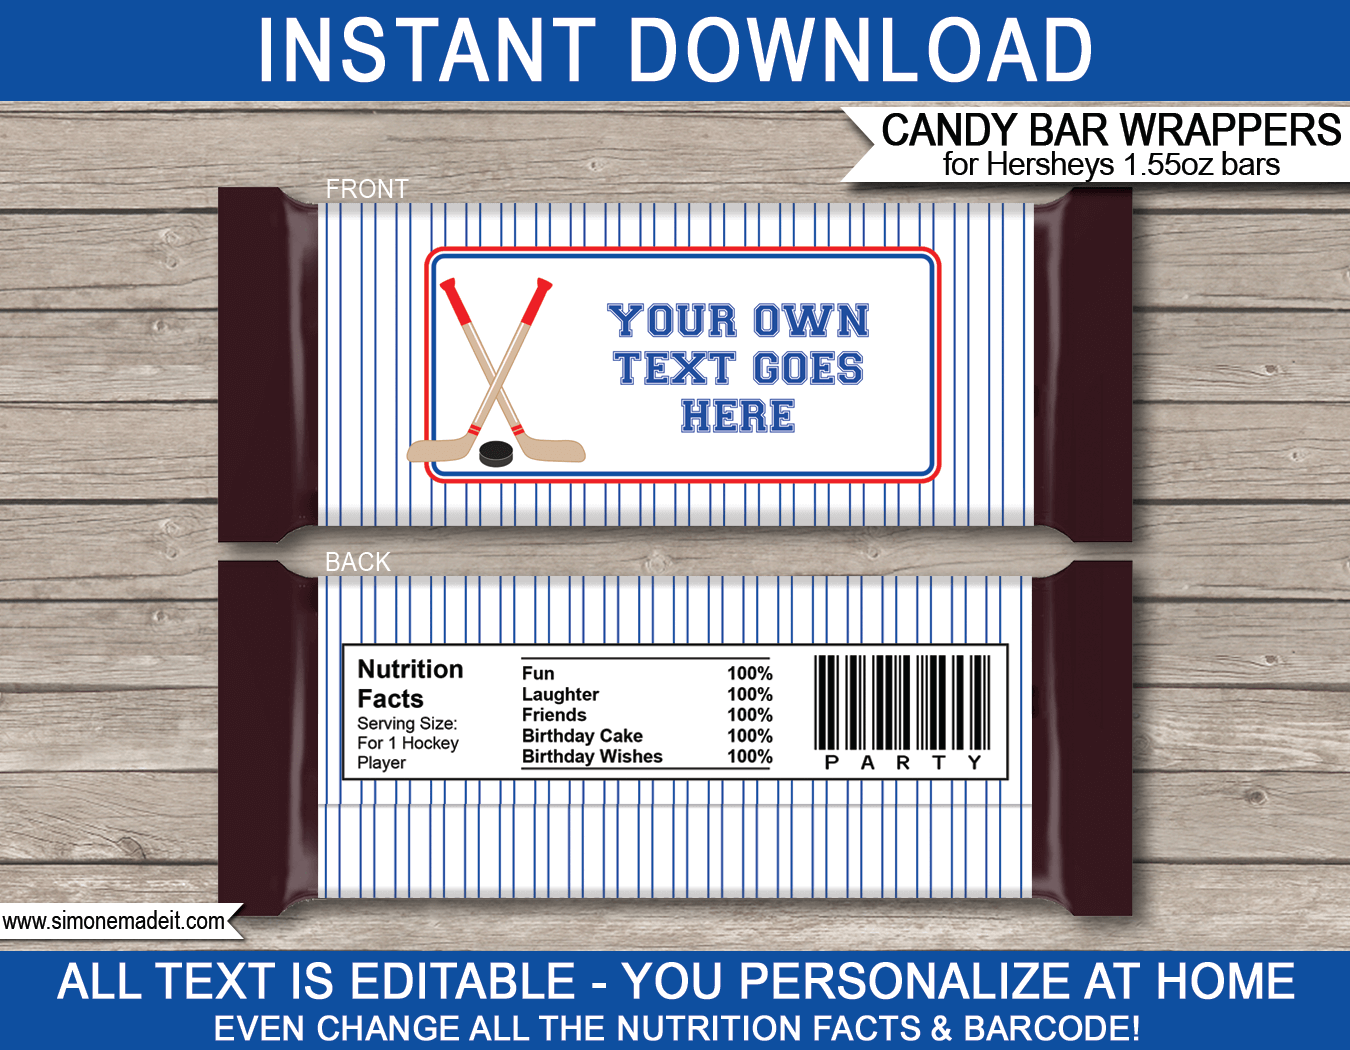 Hockey Party Hershey Candy Bar Wrappers | Red Blue | Birthday Party Favors | Personalized Candy Bars | Editable Template | INSTANT DOWNLOAD $3.00 via simonemadeit.com